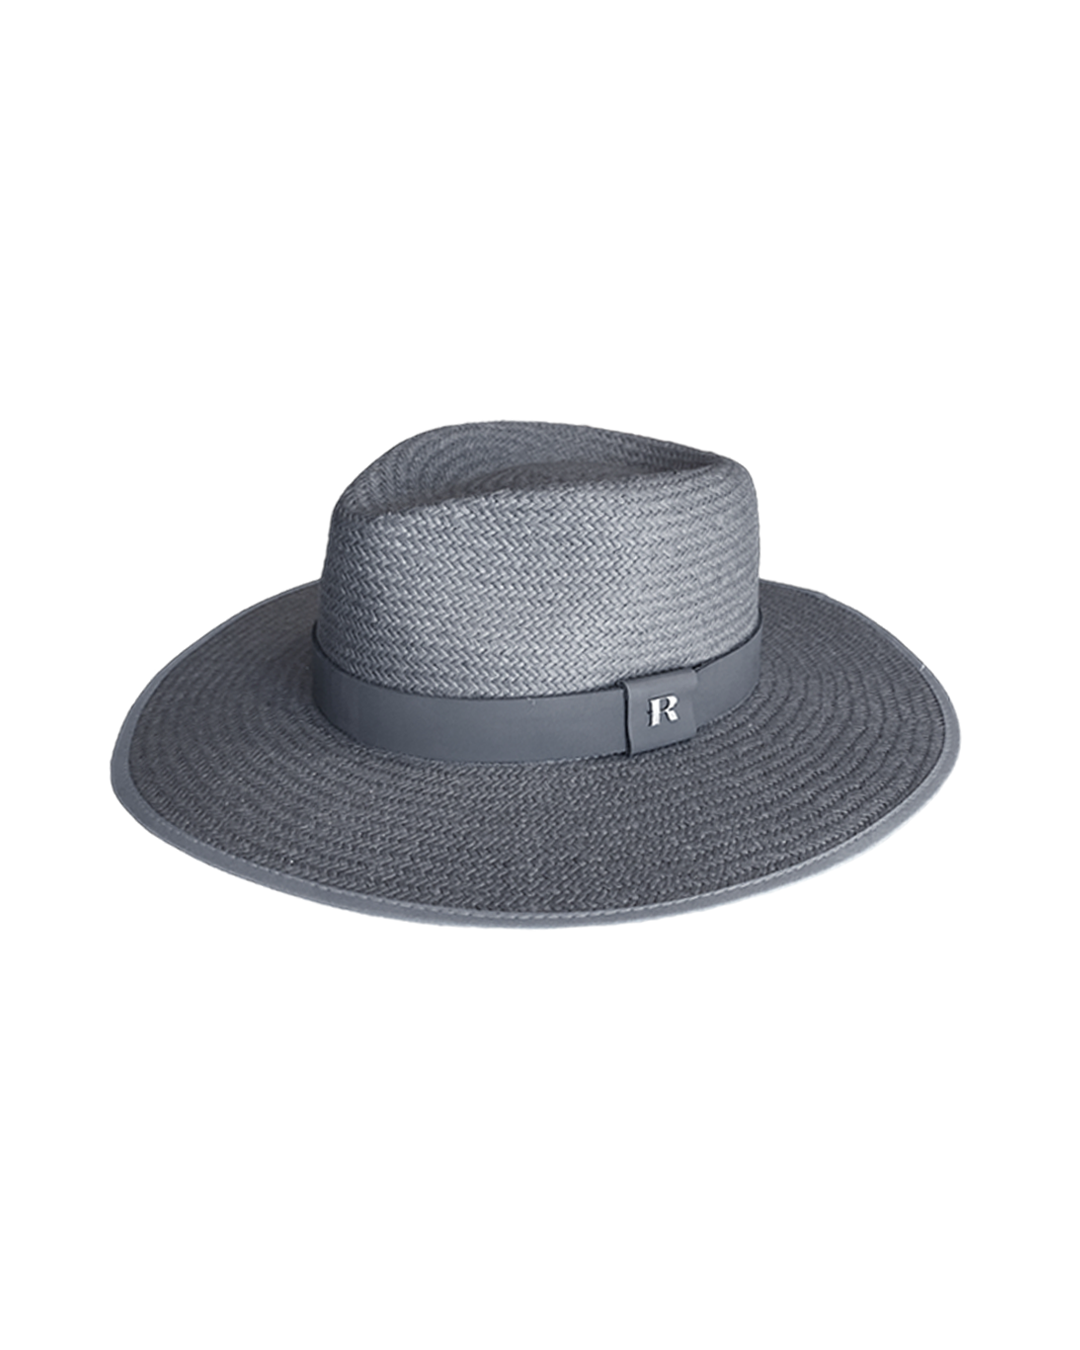 STRAW-HAT IN GRAY COLOUR